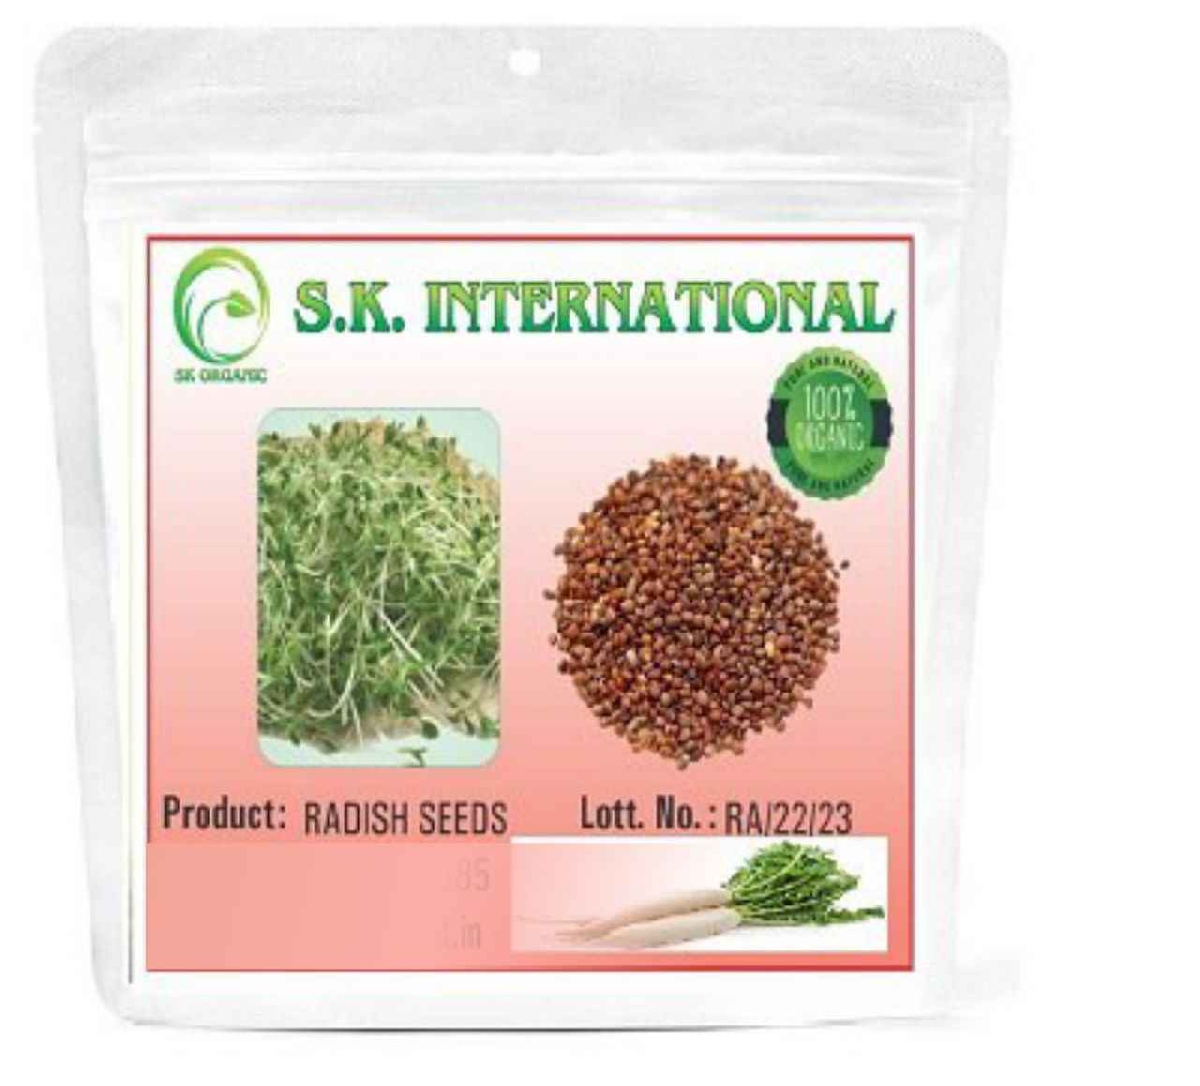  Radish Seeds (Muli) 100% Organic for Cultivation and sprouting , NON GMO and No Chemicals Used 